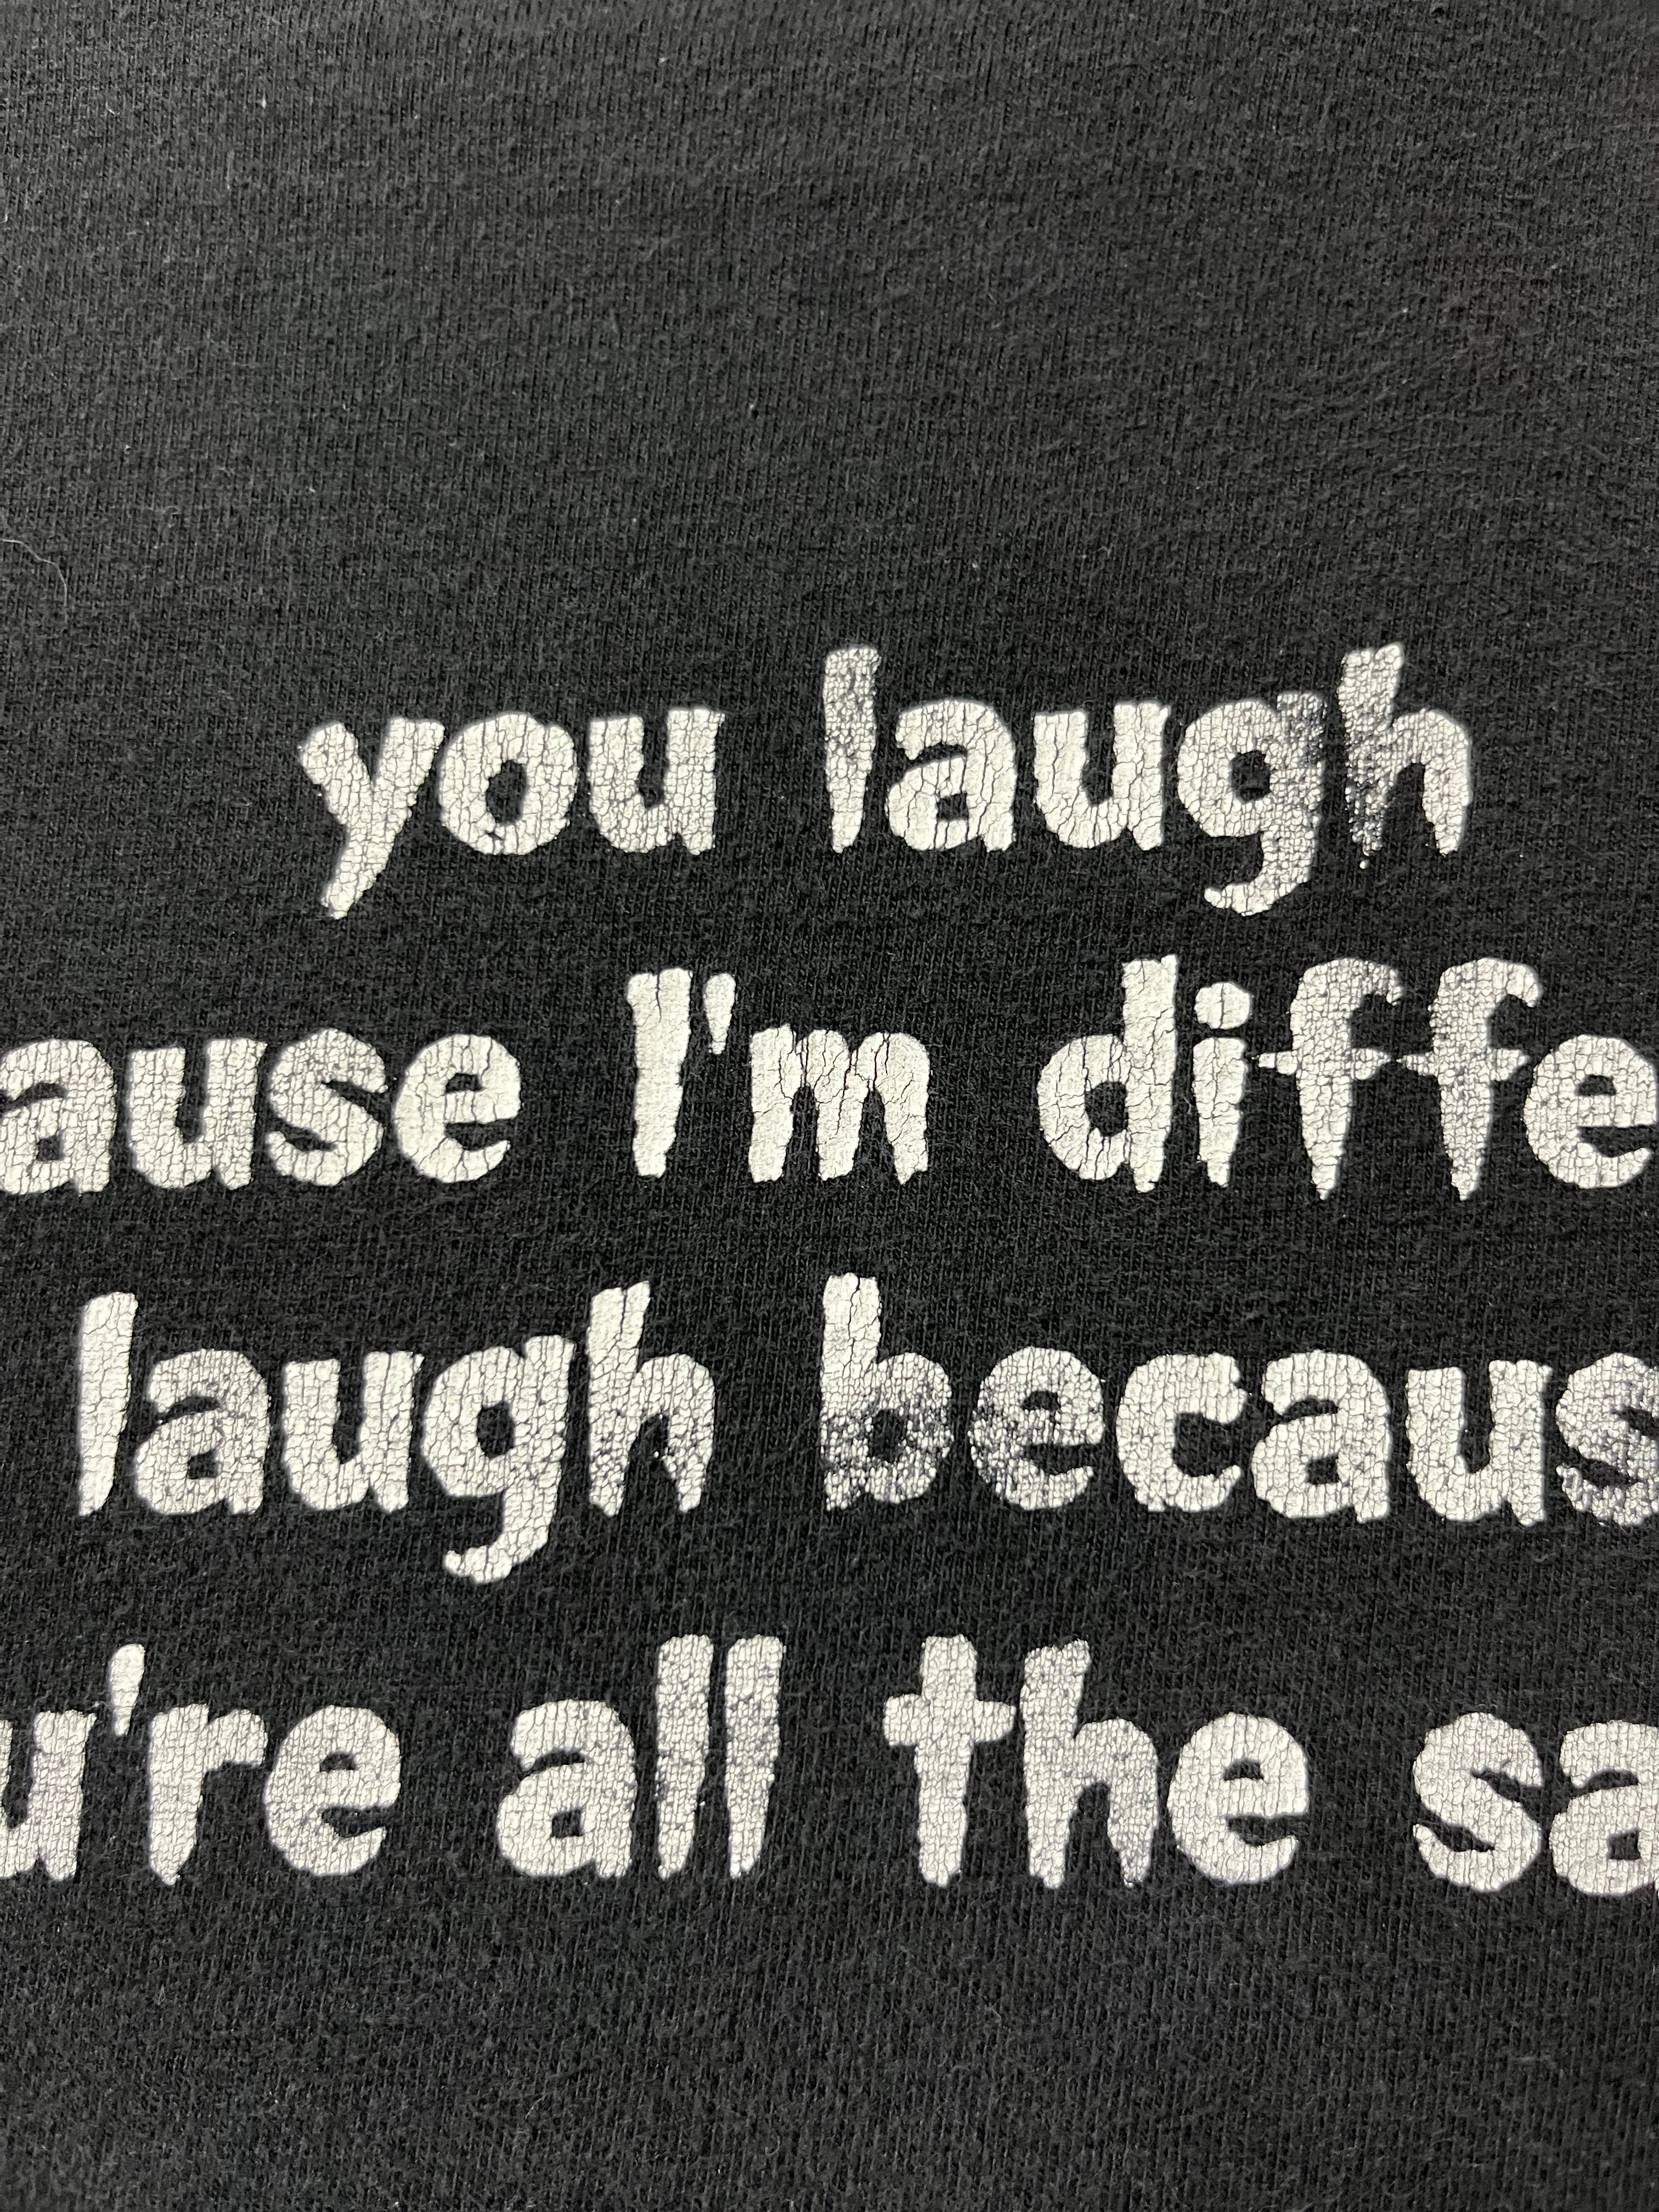 Late 90s/Early 00s ‘You Laugh Because I’m Different’ Novelty T-Shirt - Faded Black - XS